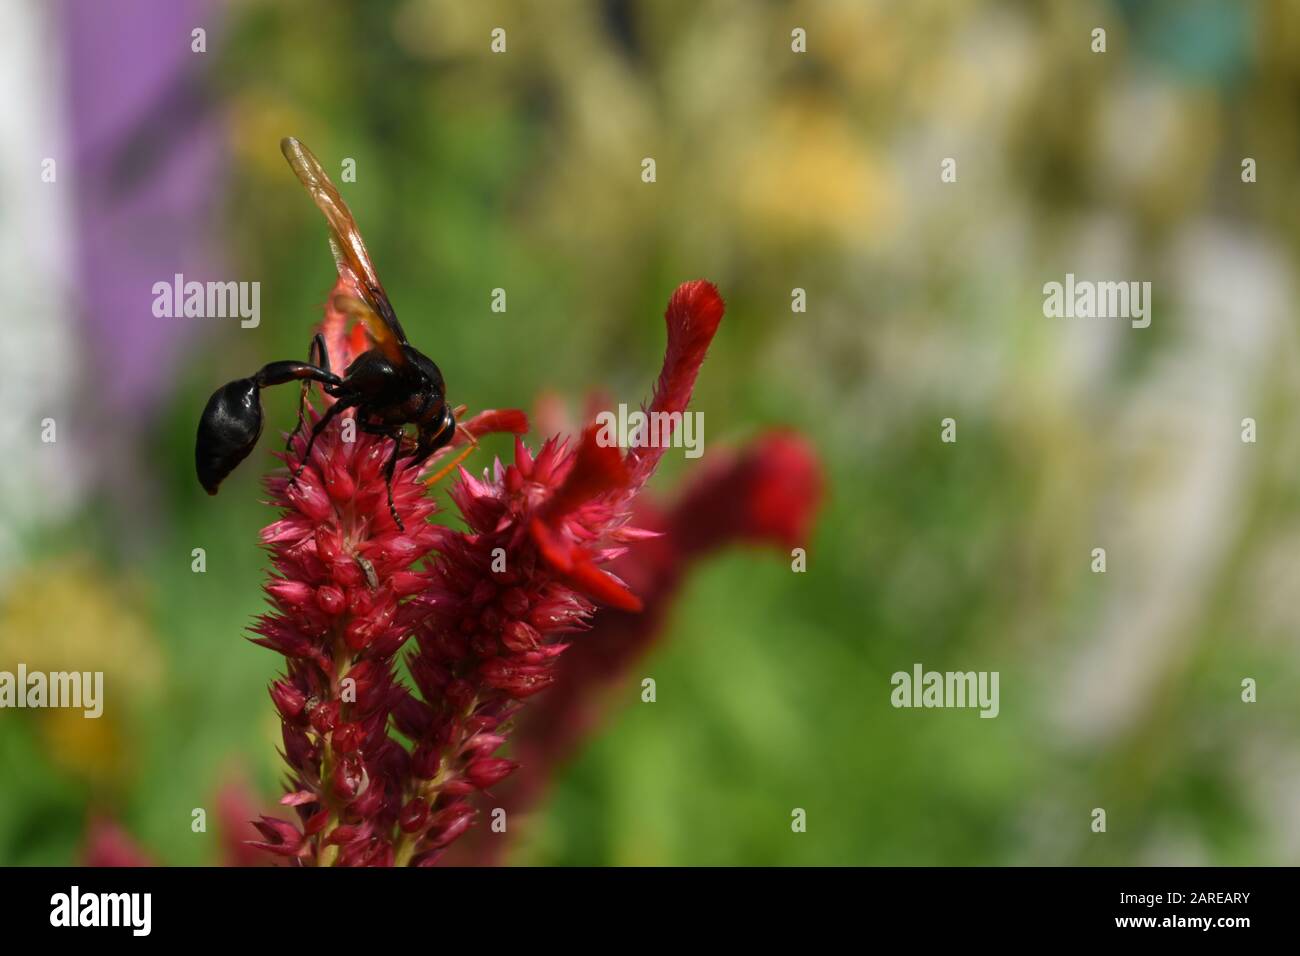 A potter wasp perched on a red celosia flower. Surakarta, Indonesia. Stock Photo